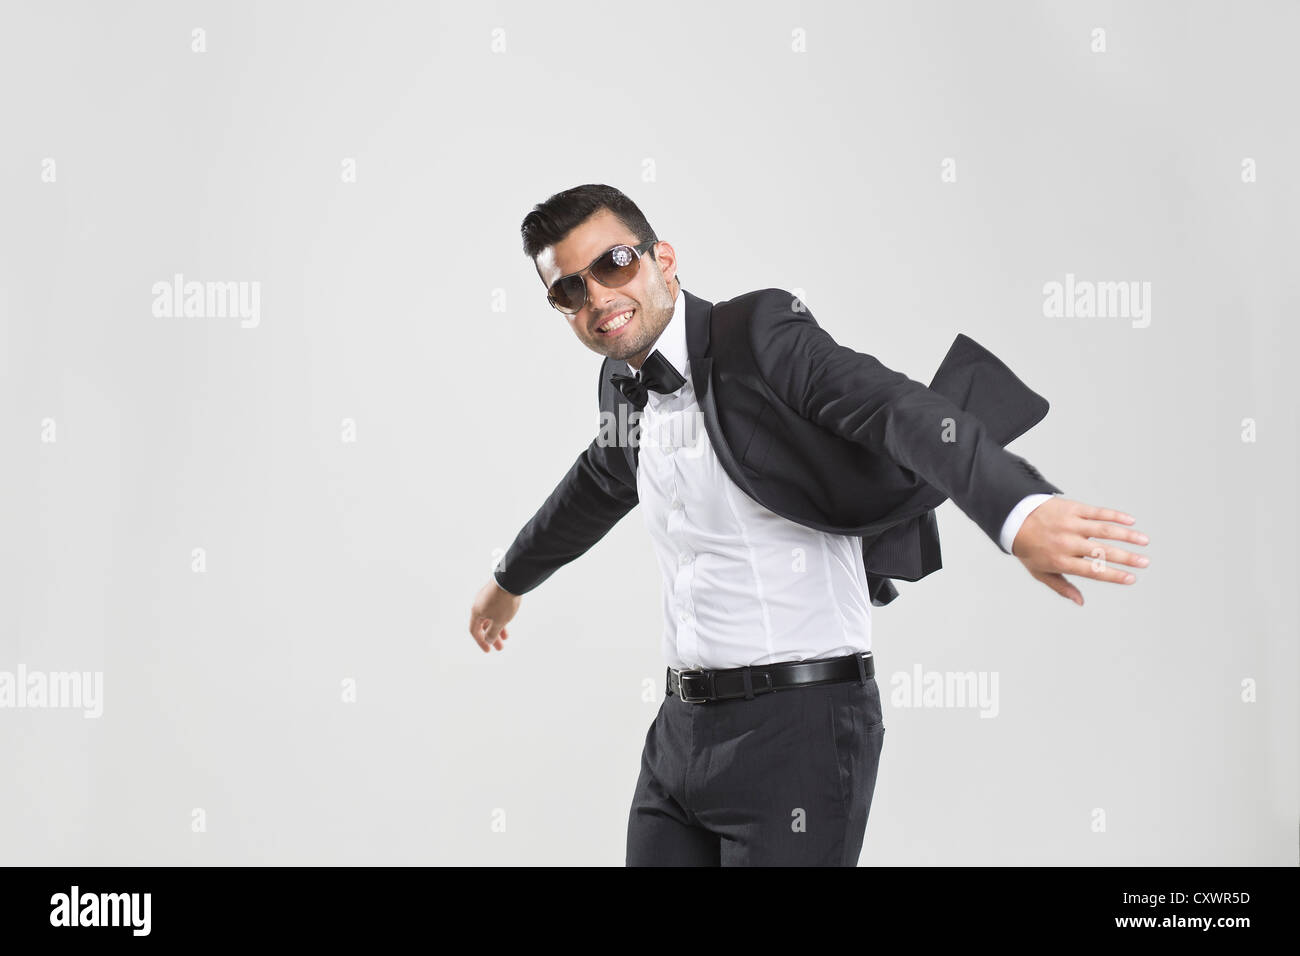 Smiling man in tuxedo dancing Banque D'Images